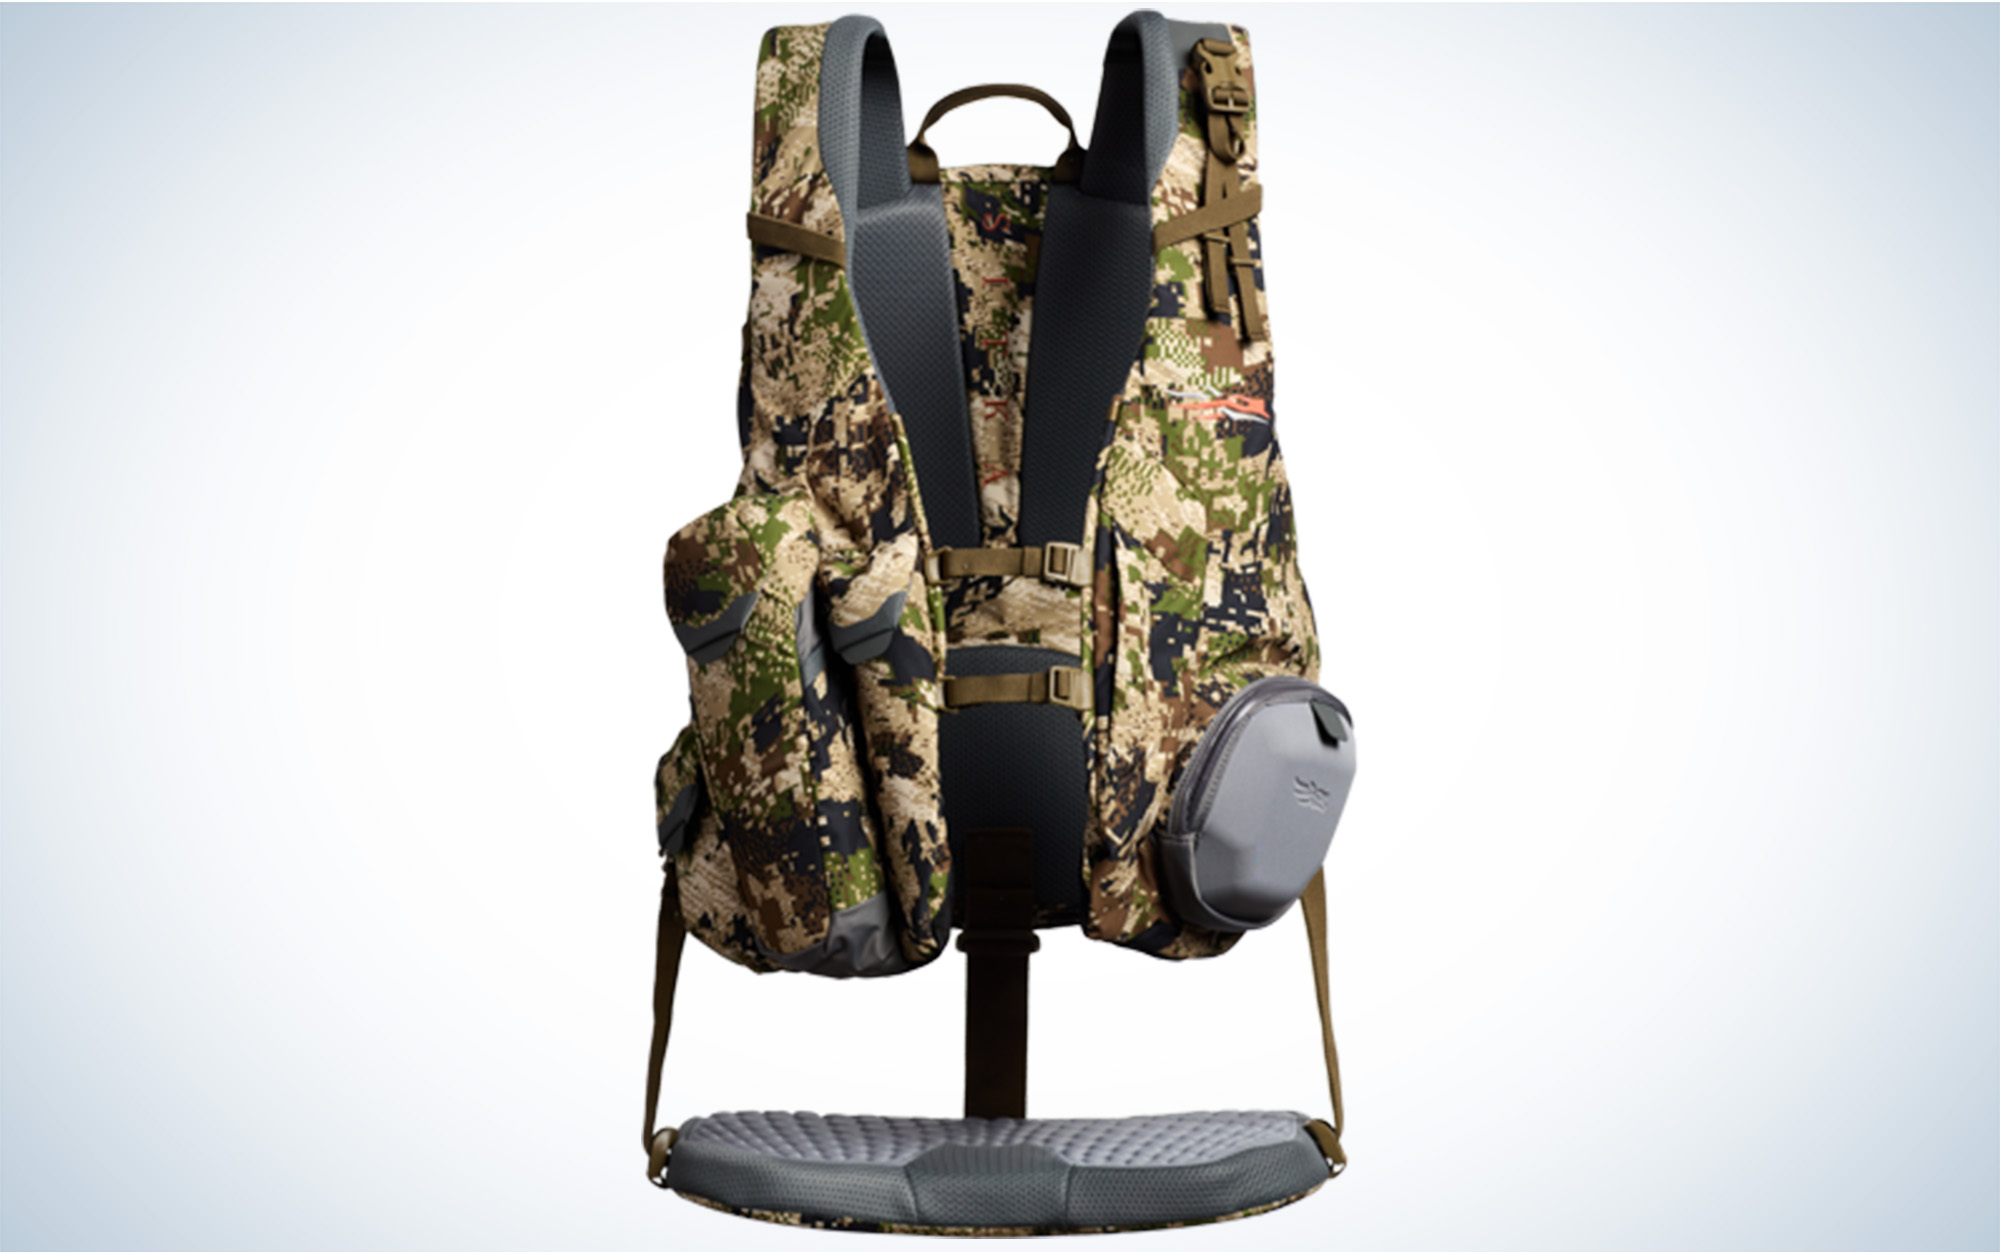 The SITKA Equinox Turkey Vest is one of the best vests for turkey hunting.